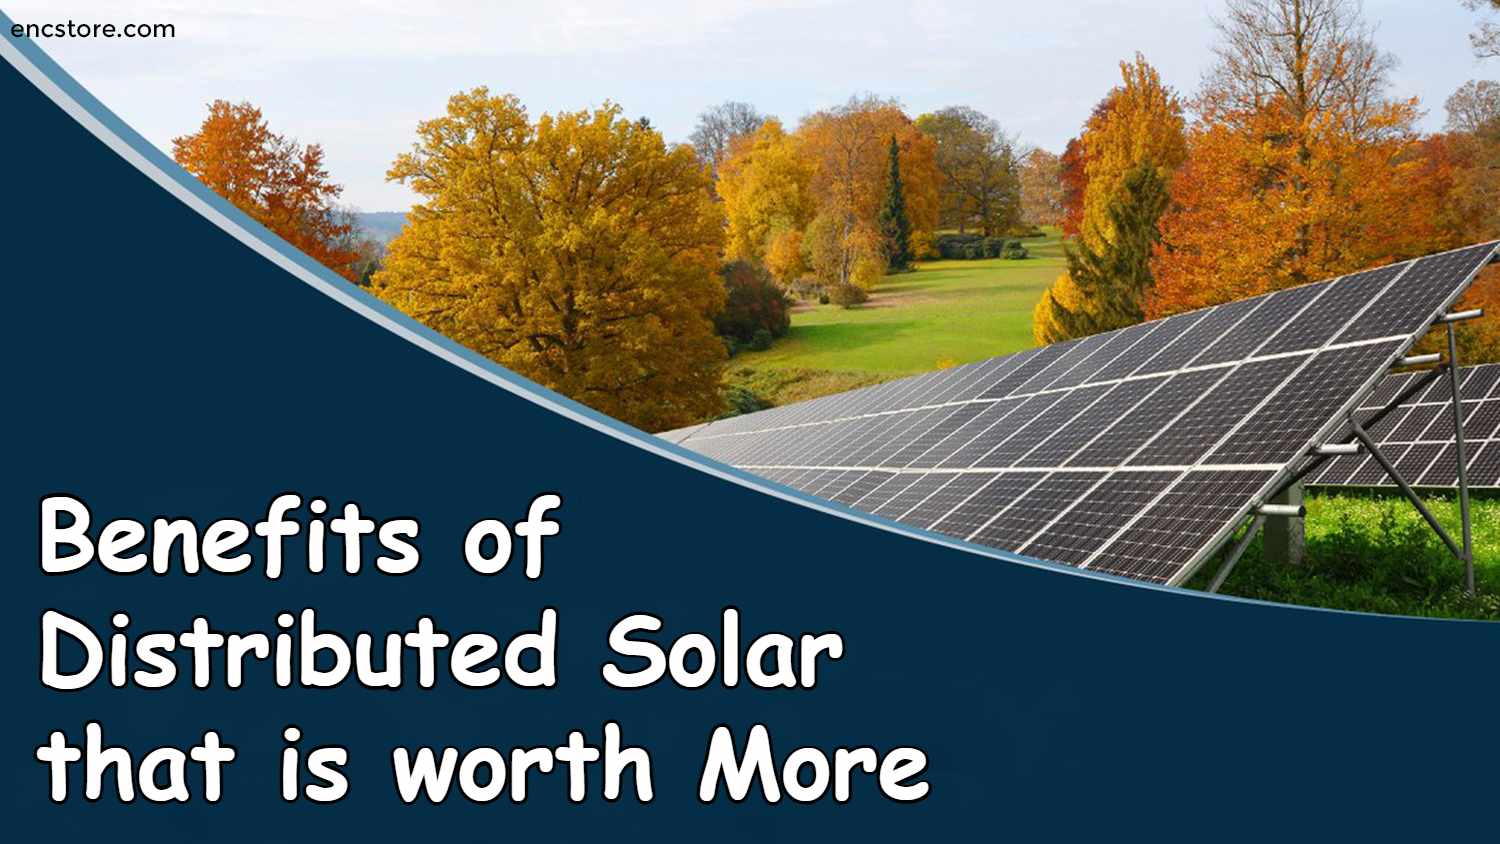 Benefits of Distributed Solar that is worth More